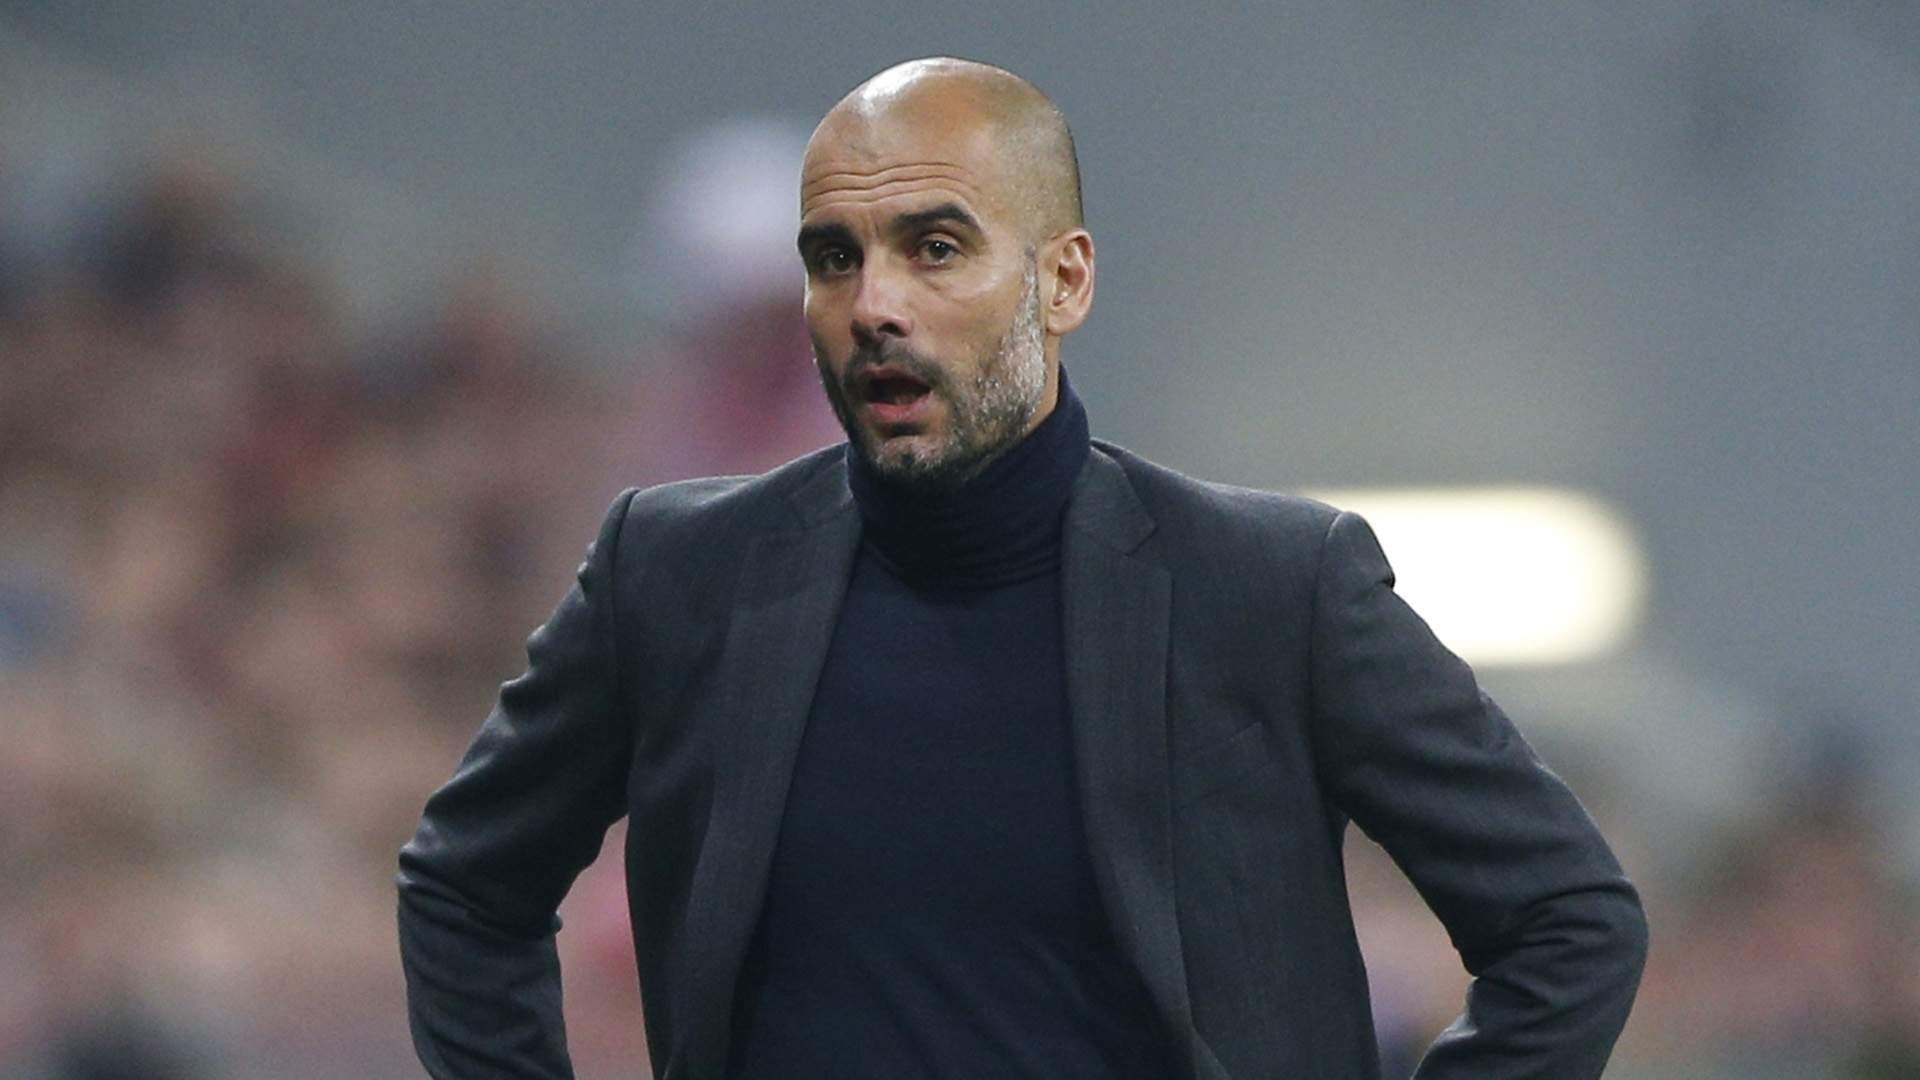 Pep Guardiola tells Manchester City some home truths- The New